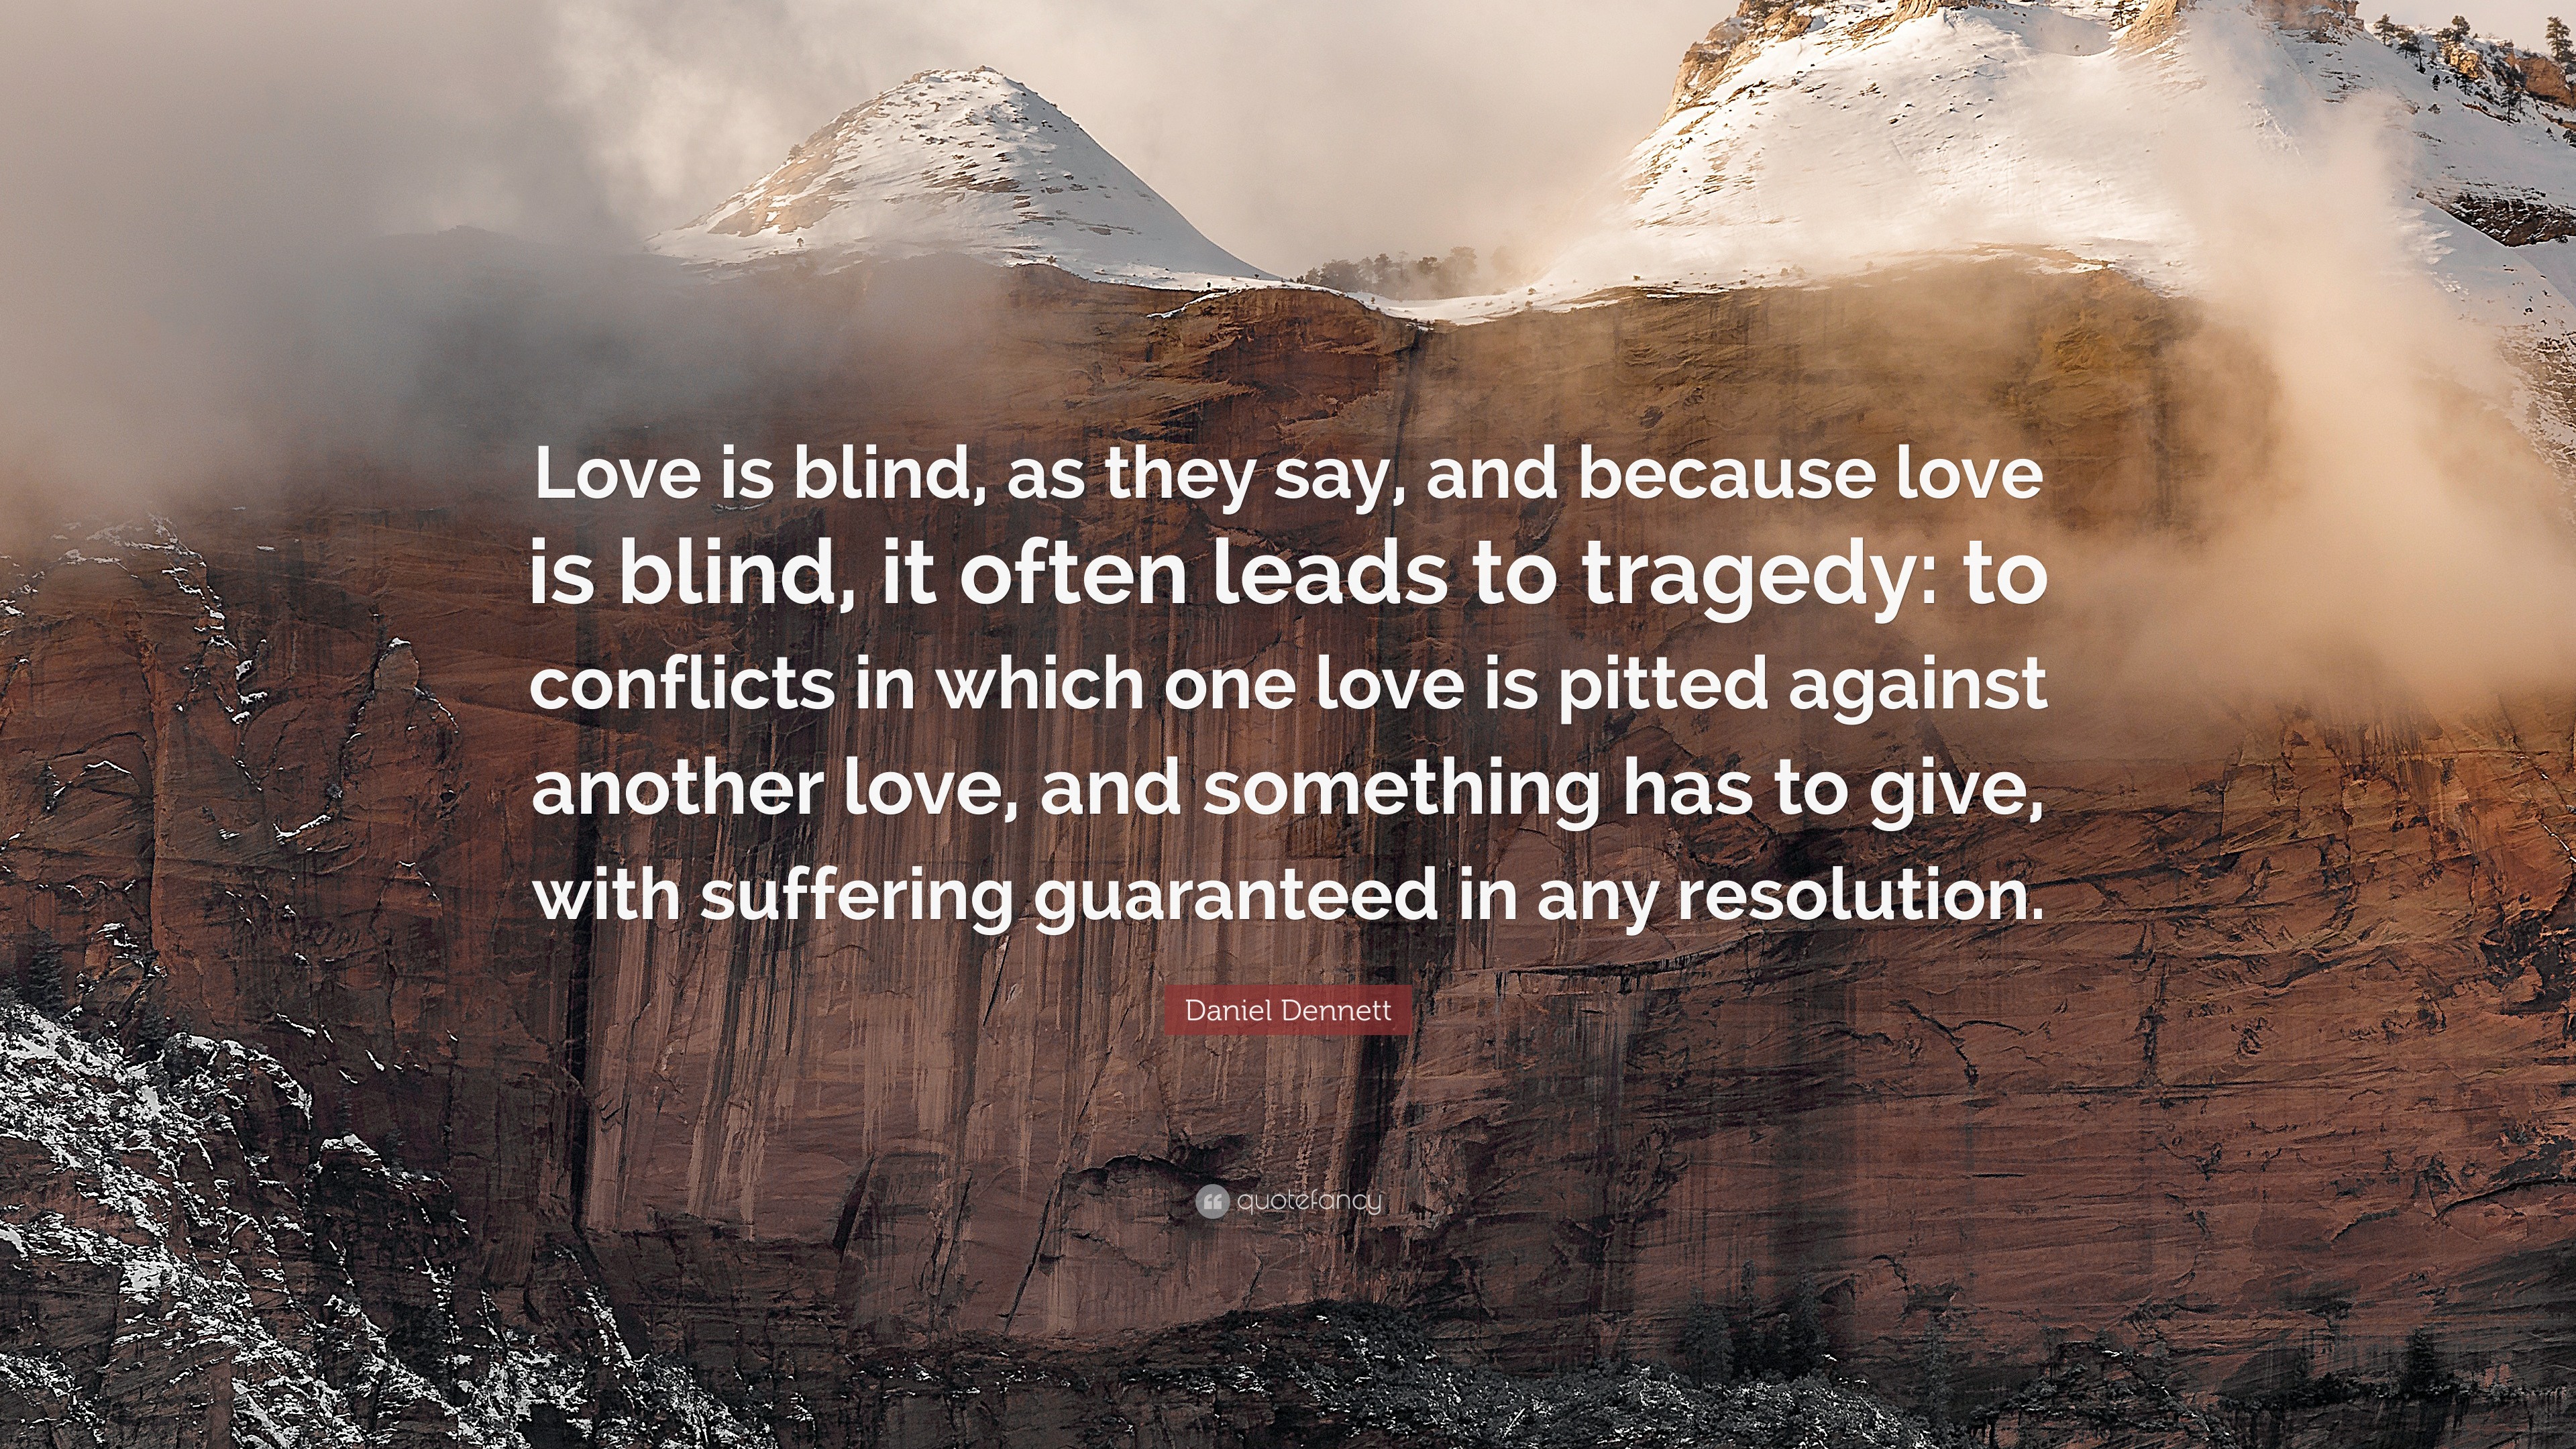 Daniel Dennett Quote “Love is blind as they say and because love